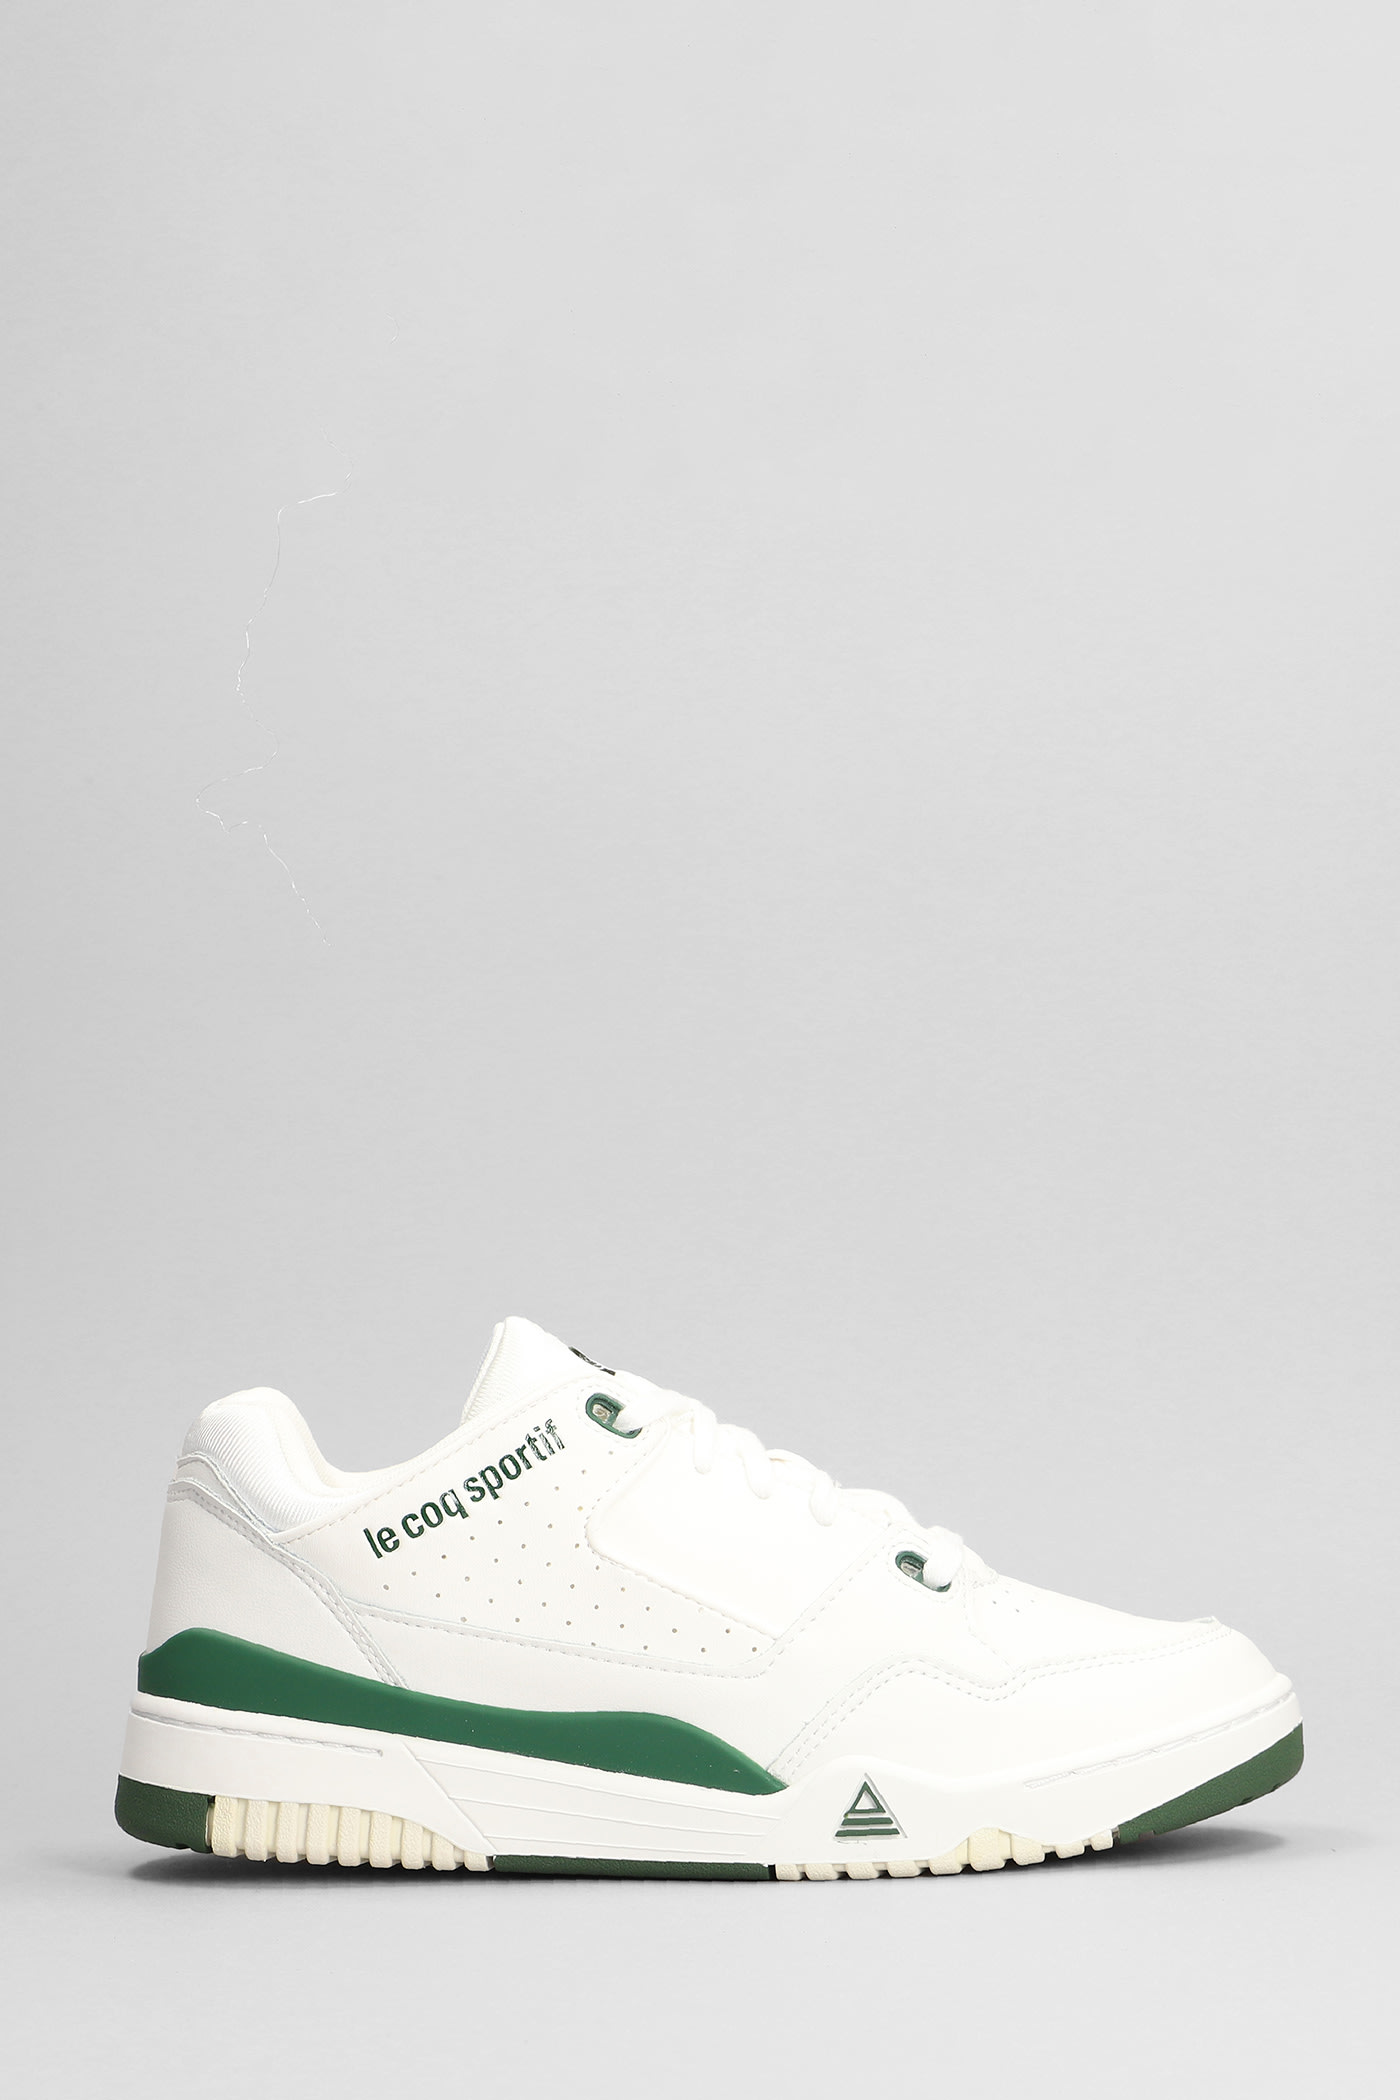 LE COQ SPORTIF LCS T1000 SNEAKERS IN WHITE LEATHER